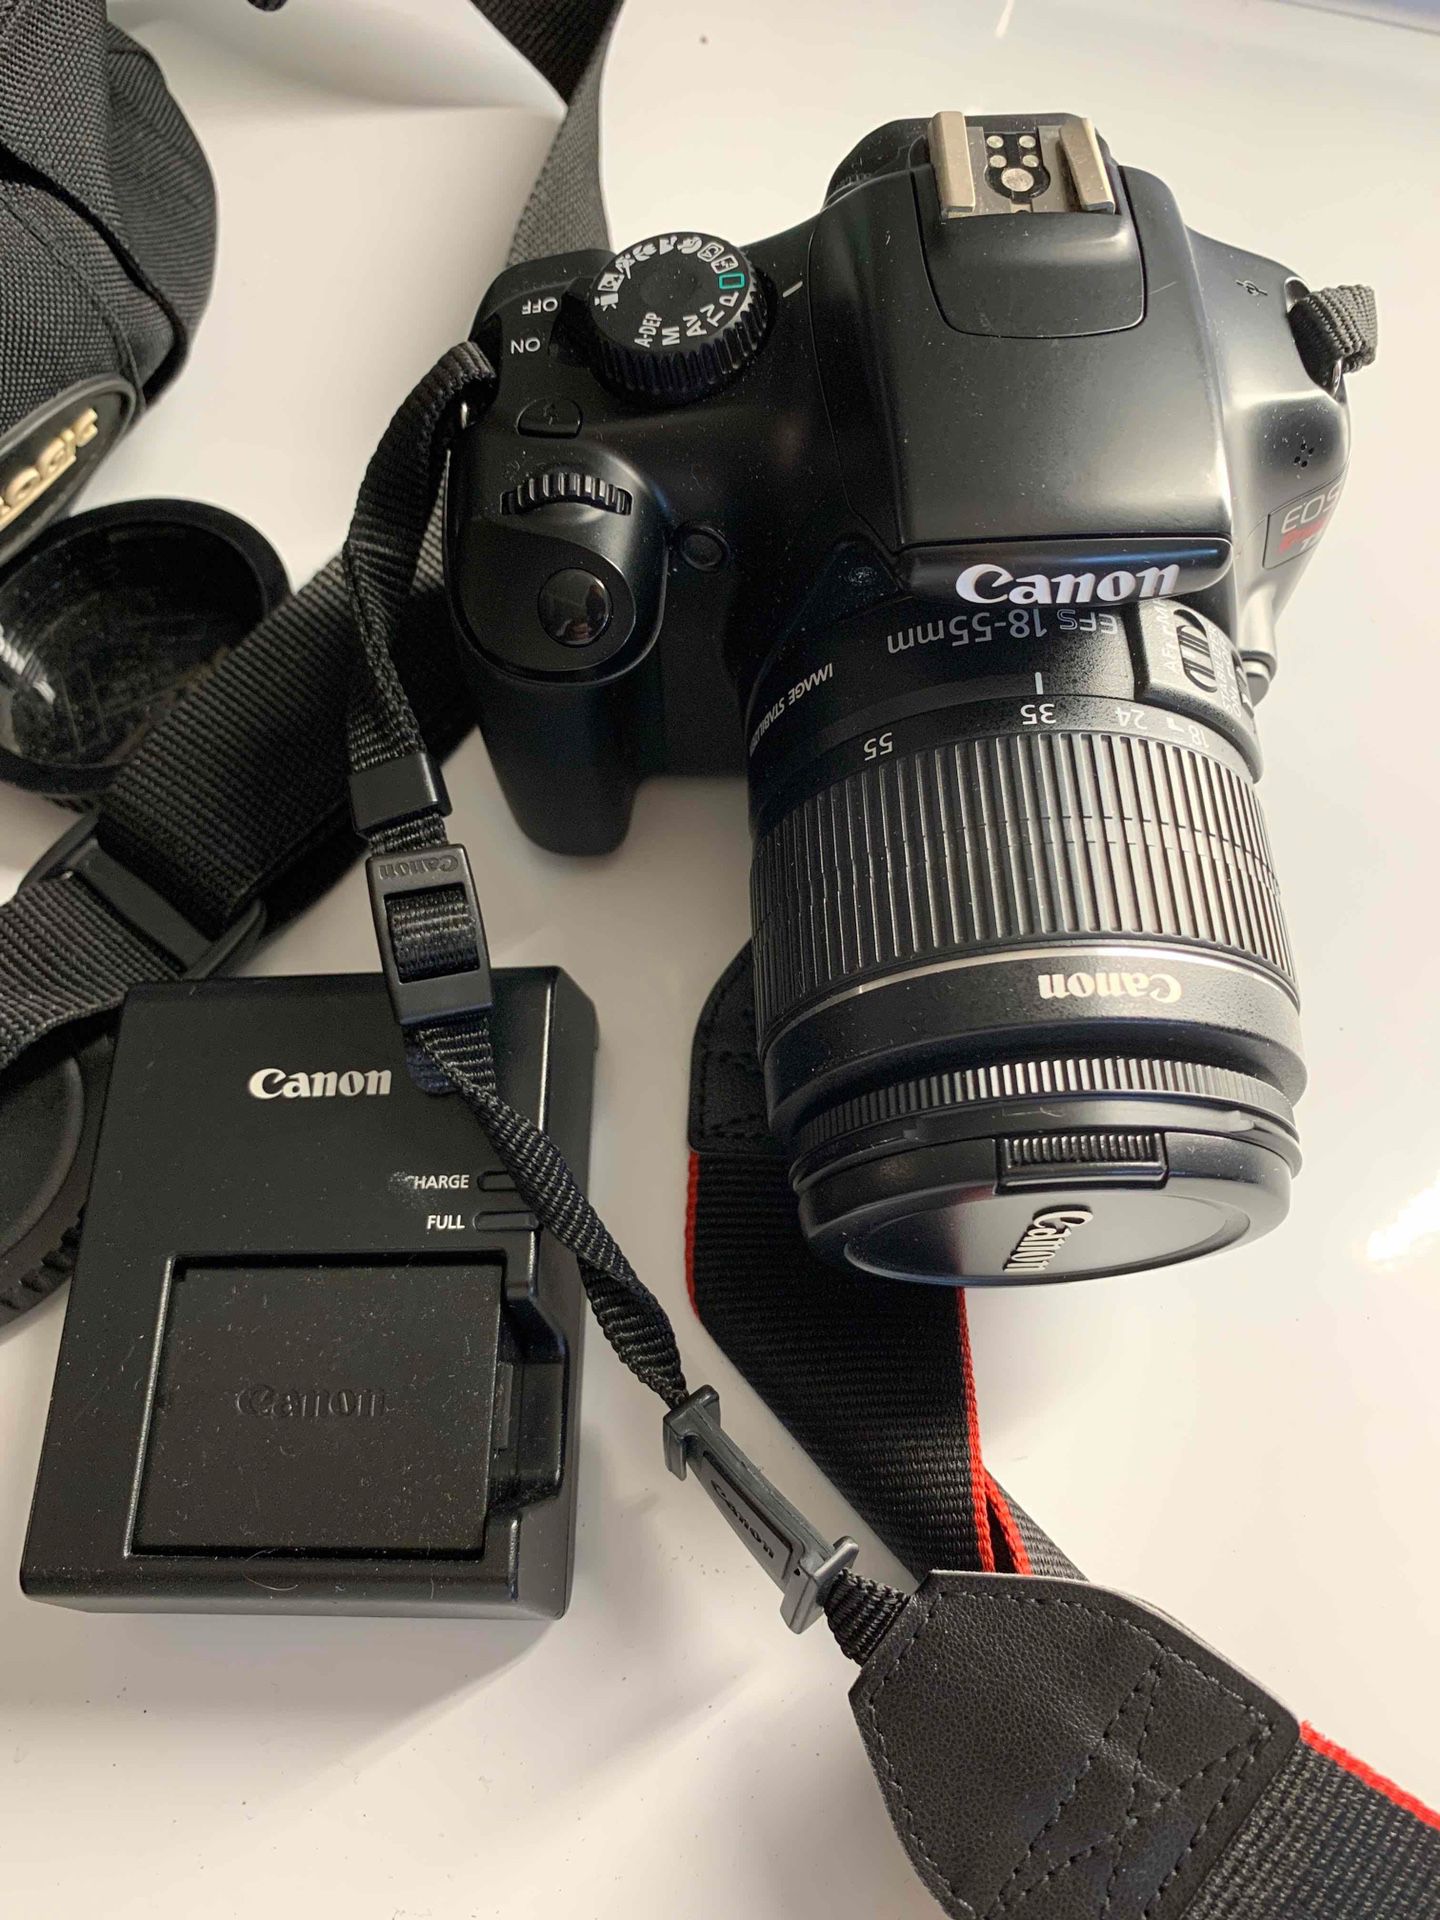 Canon T3 Digital SLR with 18-55mm Lens